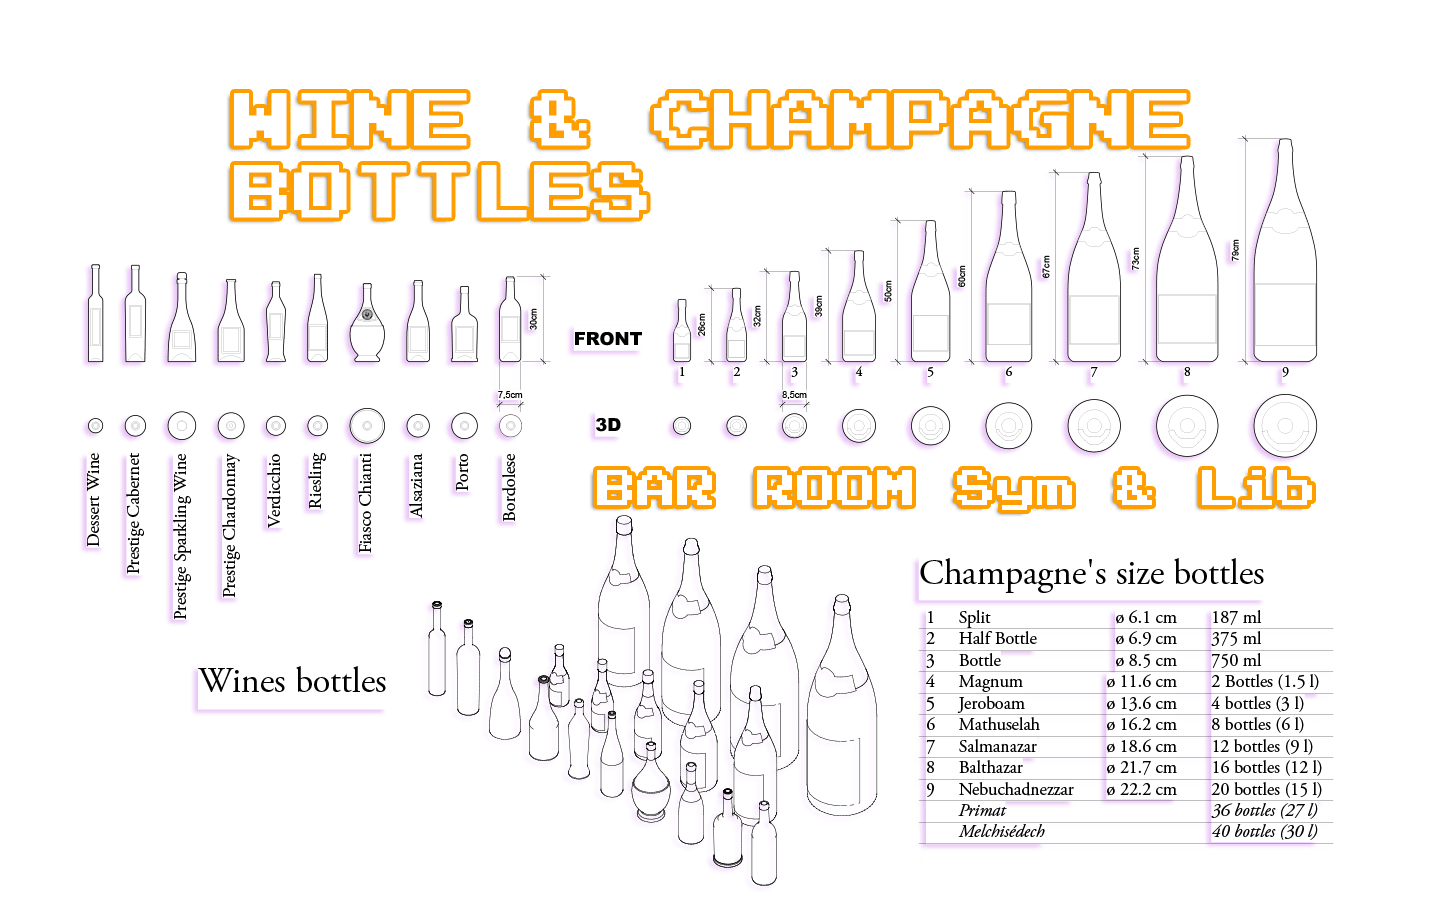 Bar room symbols and libraries: wine & Champagne bottles